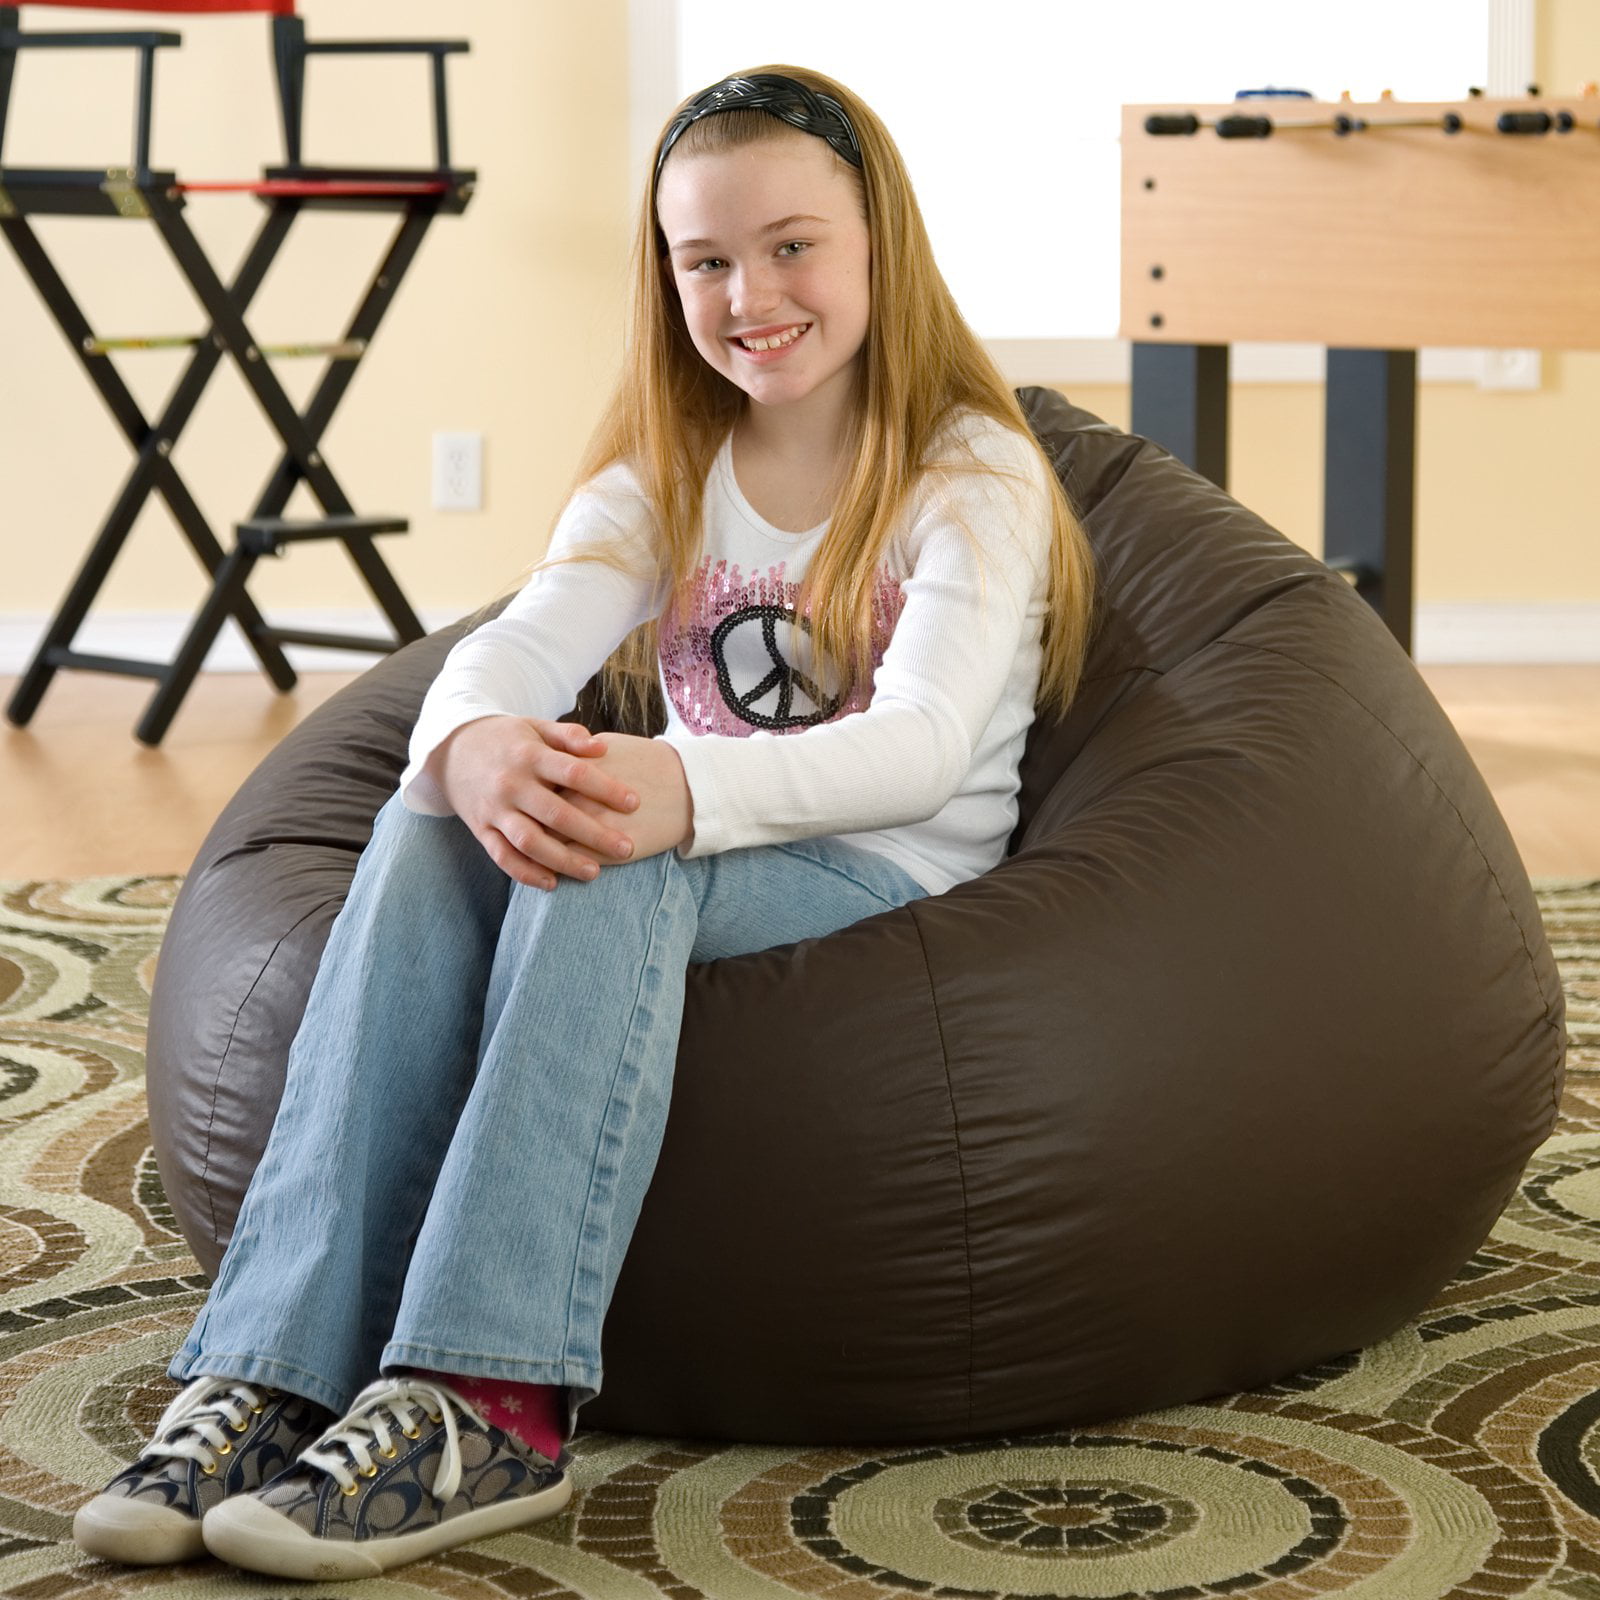 Extra Large Faux Leather Bean Bag Chair, Faux Leather Bean Bag Cover